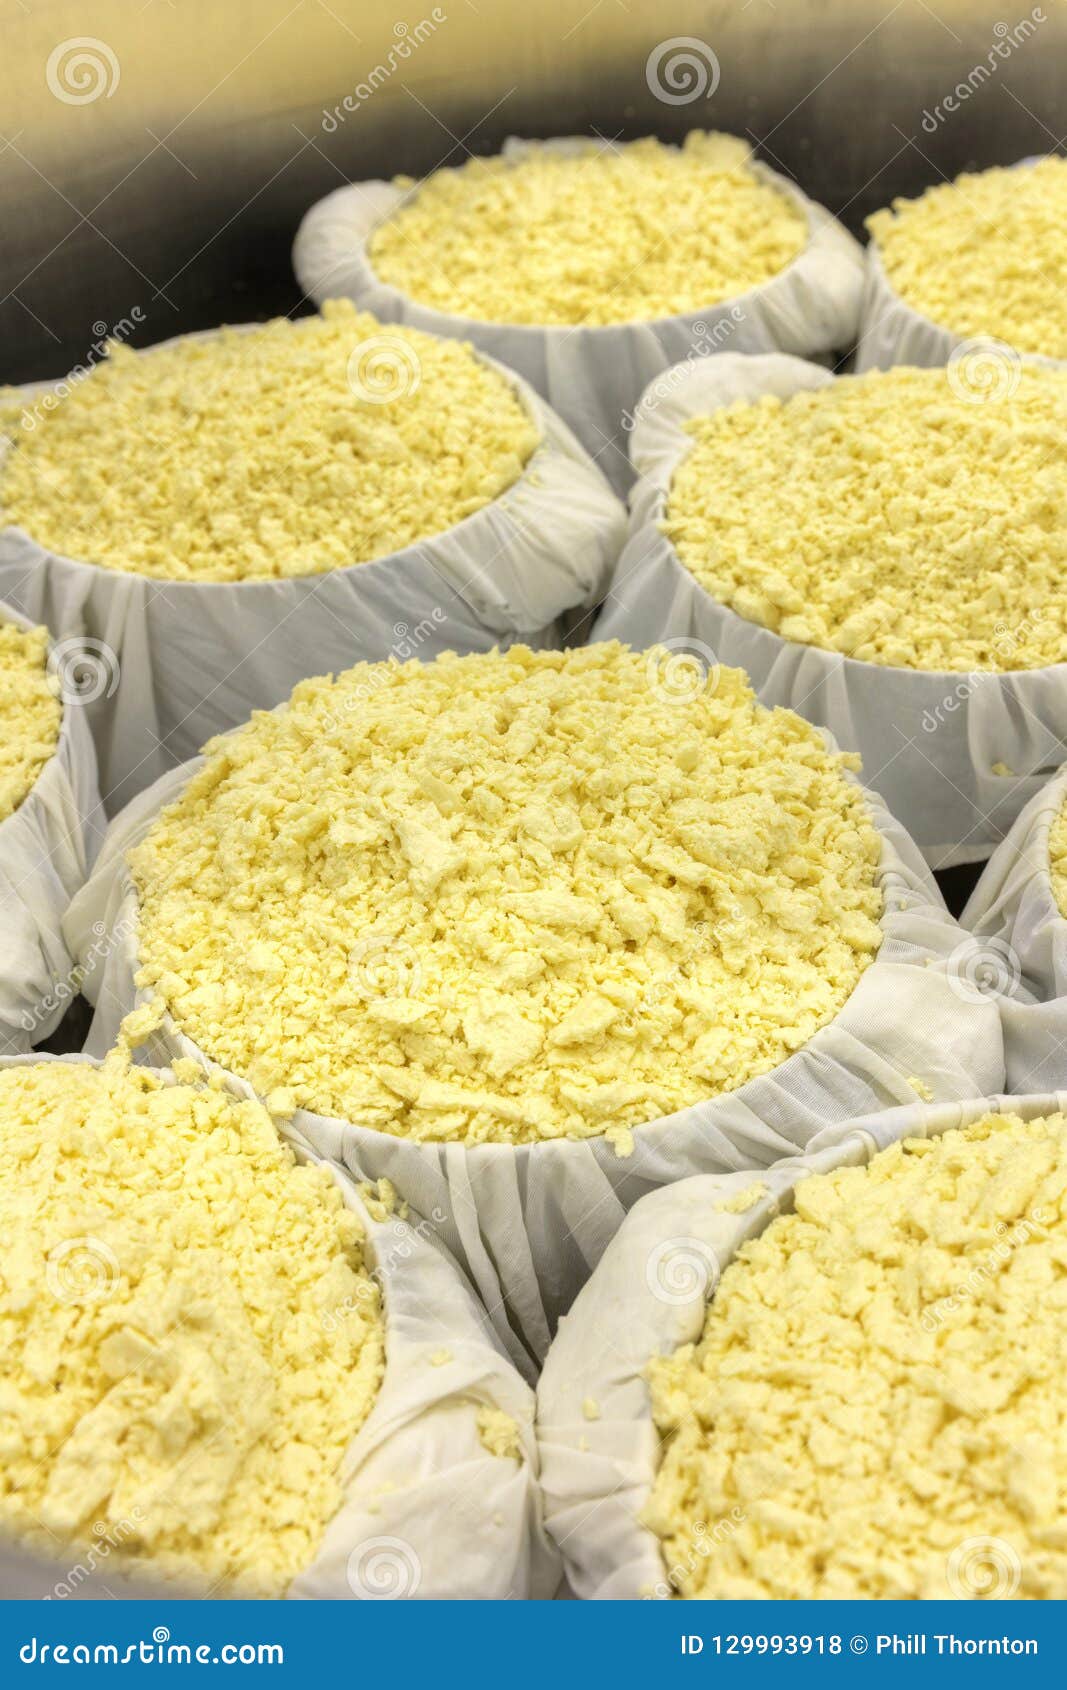 76+ Thousand Cheese Making Royalty-Free Images, Stock Photos & Pictures